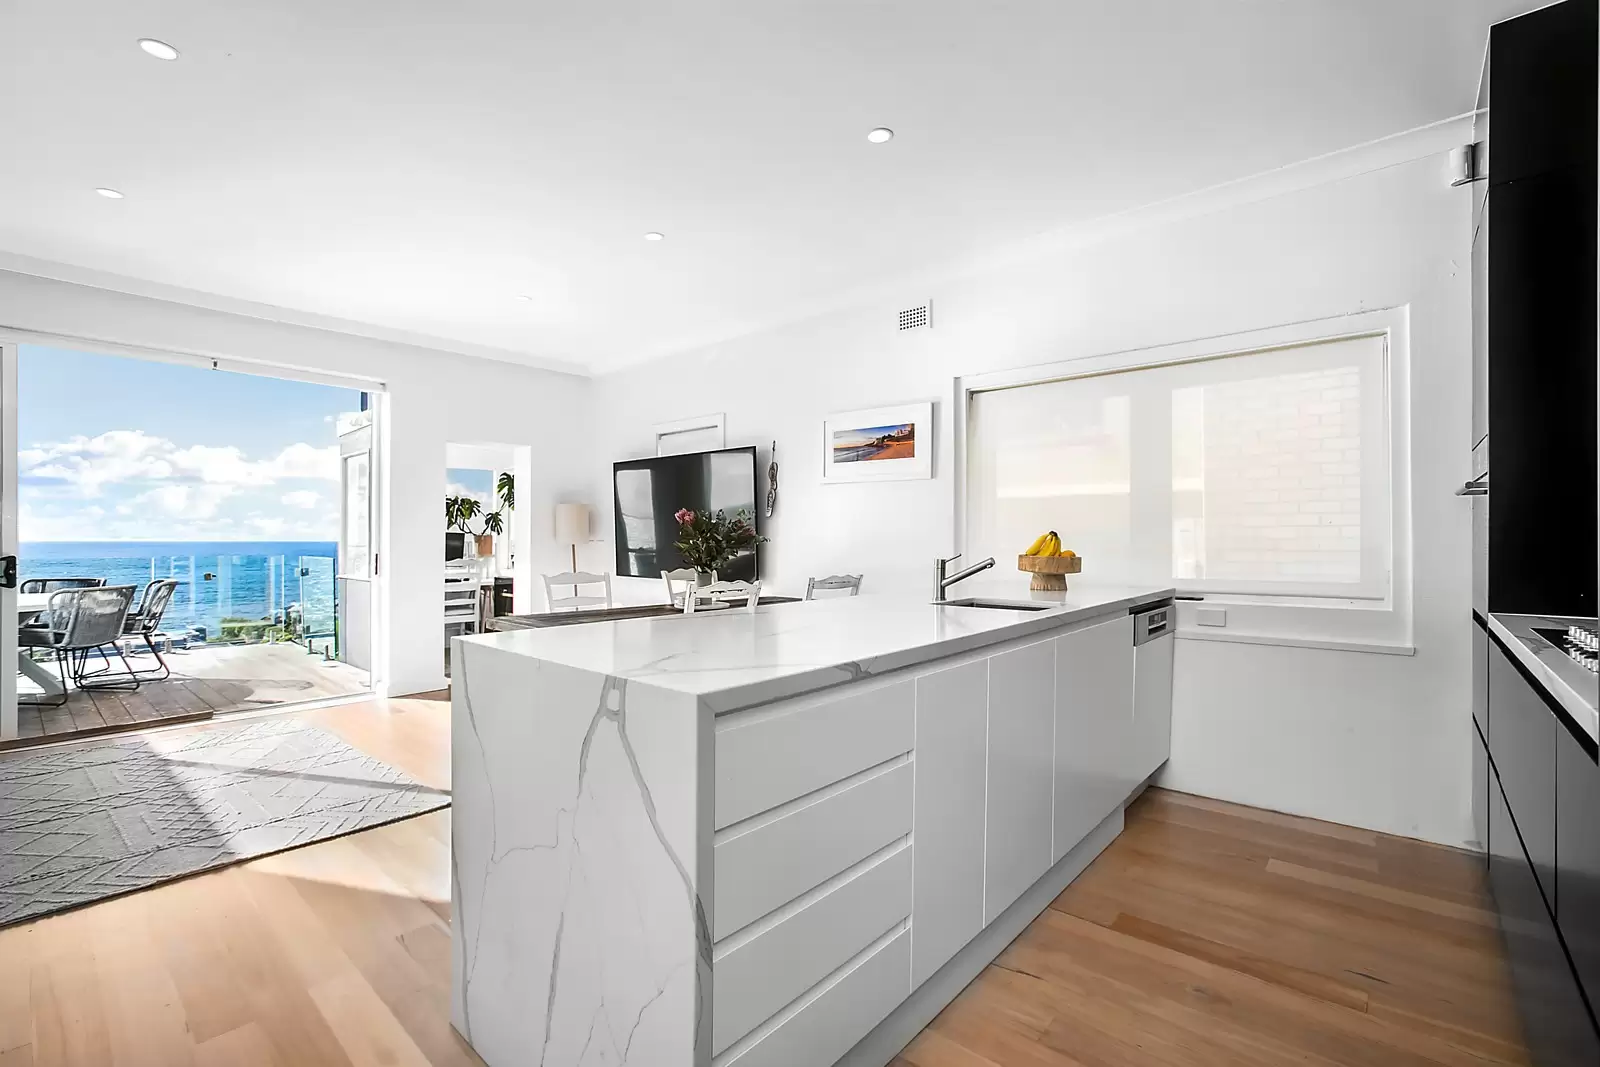 Photo #8: 73 Denning Street, South Coogee - Sold by Sydney Sotheby's International Realty